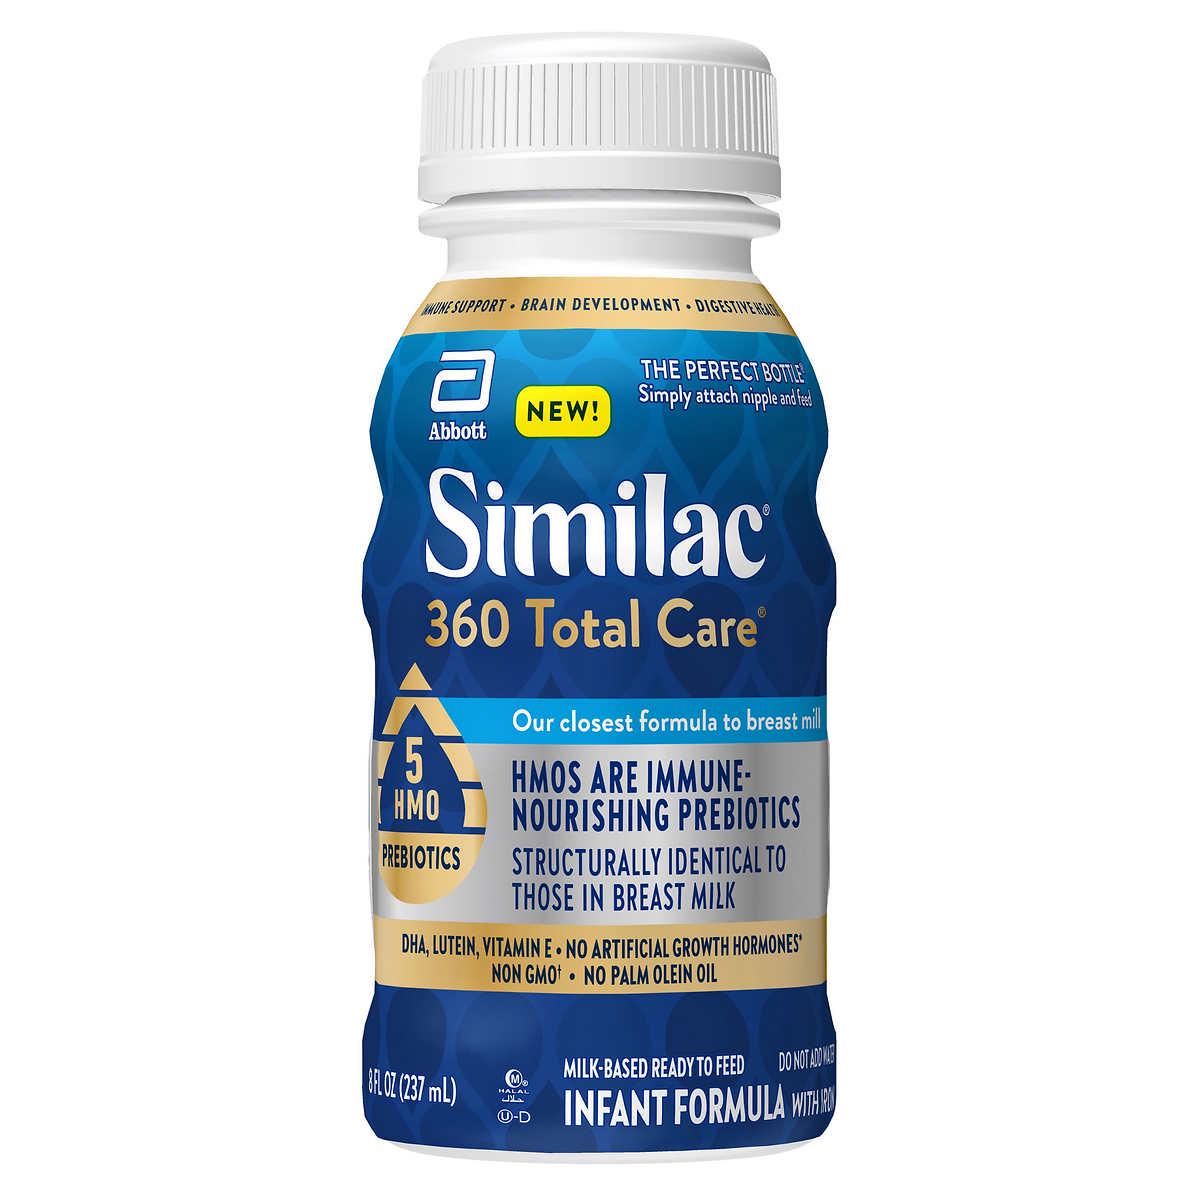 Similac 360 Total Care Ready-to-Feed Infant Formula